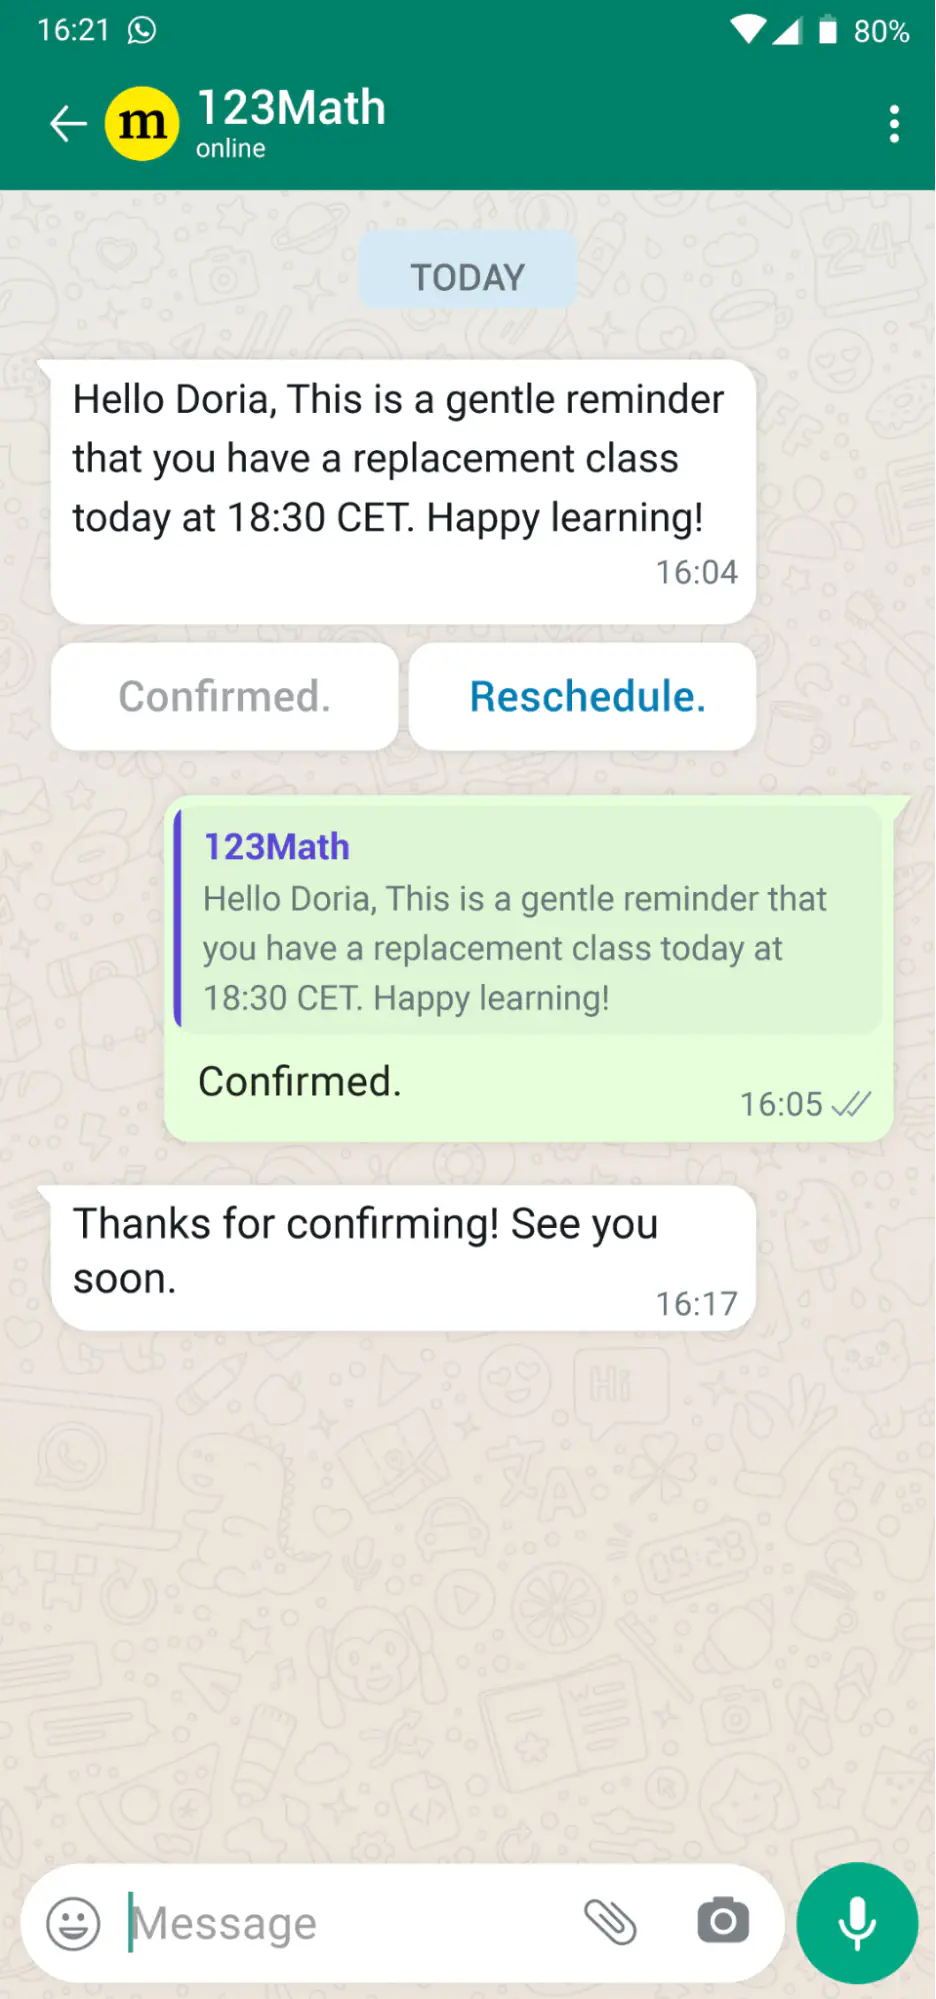 WhatsApp chatbot sending a reminder for a replacement class to a student.